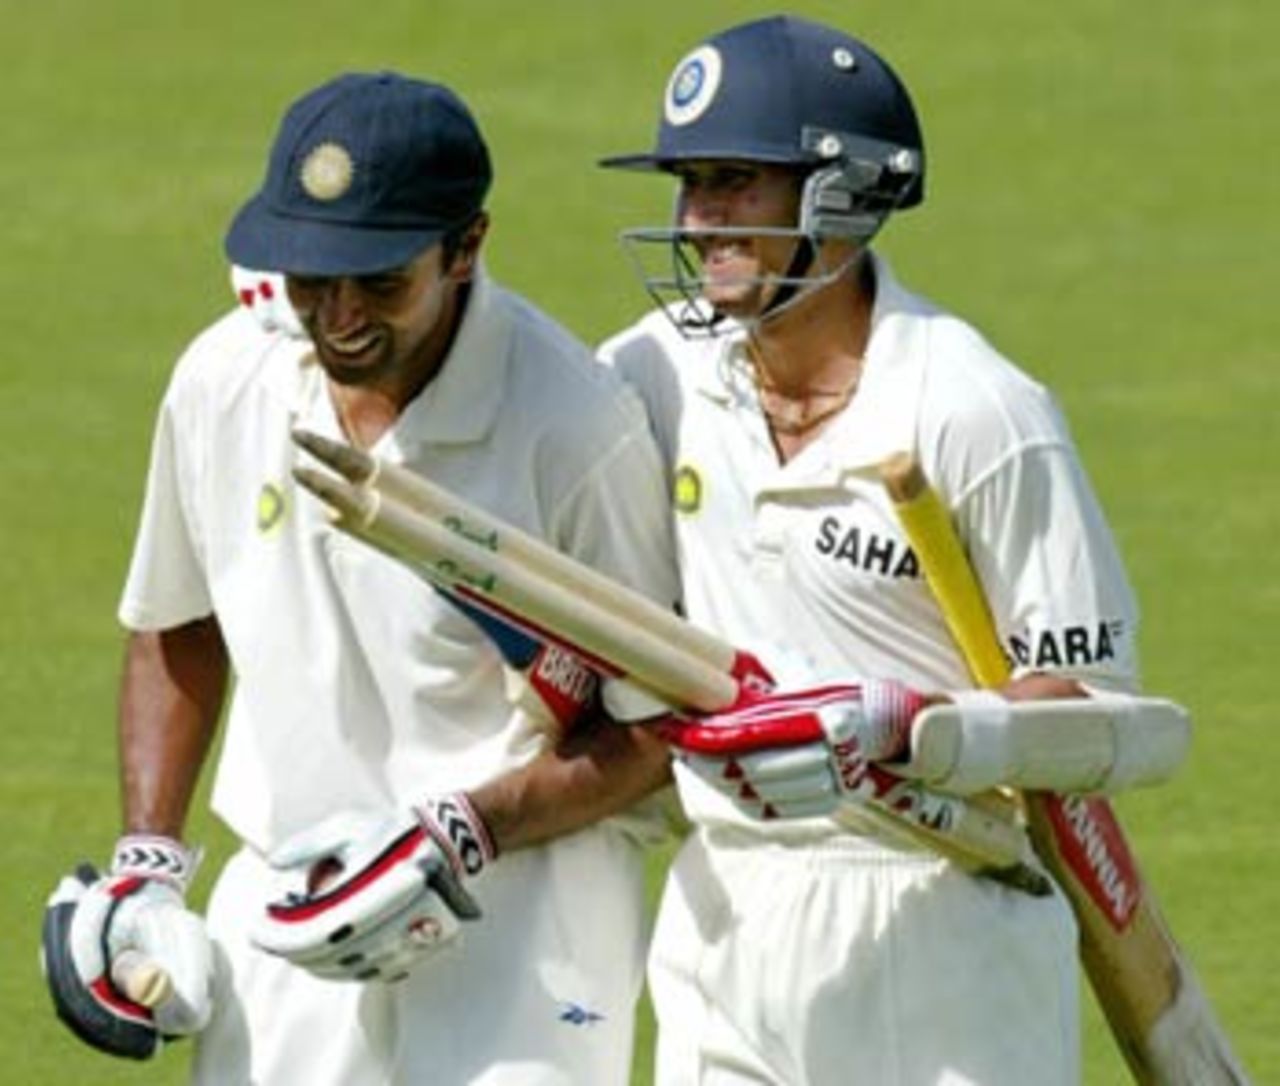 Fittingly, it was Agarkar and Dravid at the crease when the winning runs were scored, Australia v India, 2nd Test, Adelaide, 5th day, December 16, 2003